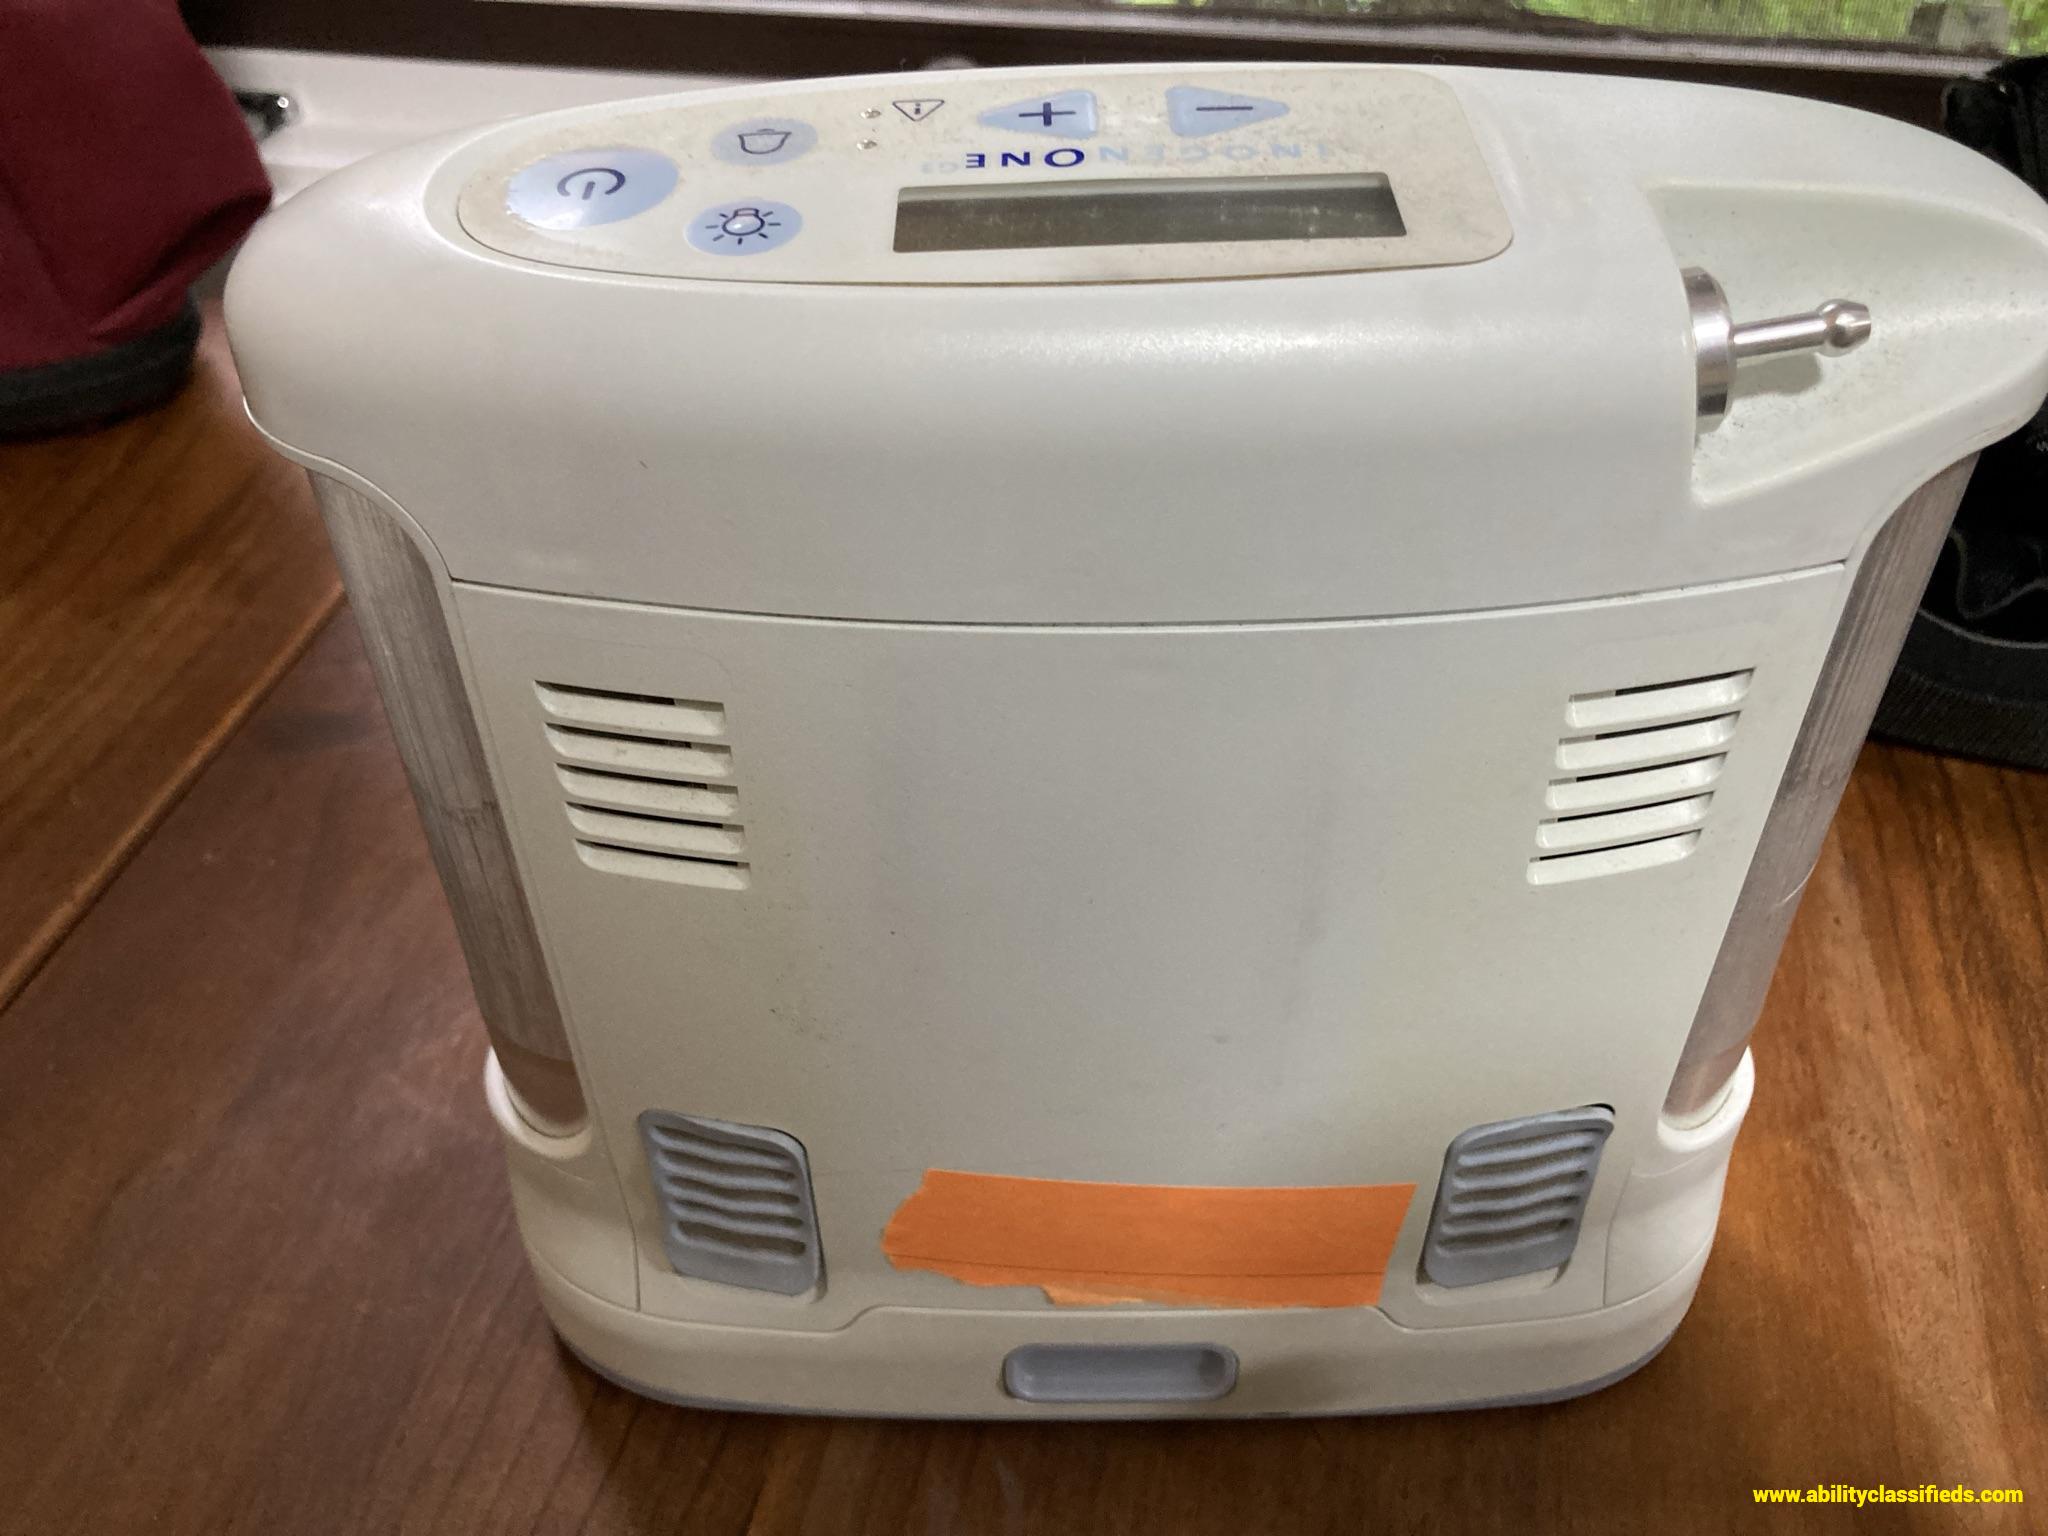 Inogen One G3 Portable Oxygen Concentrator, with accessories